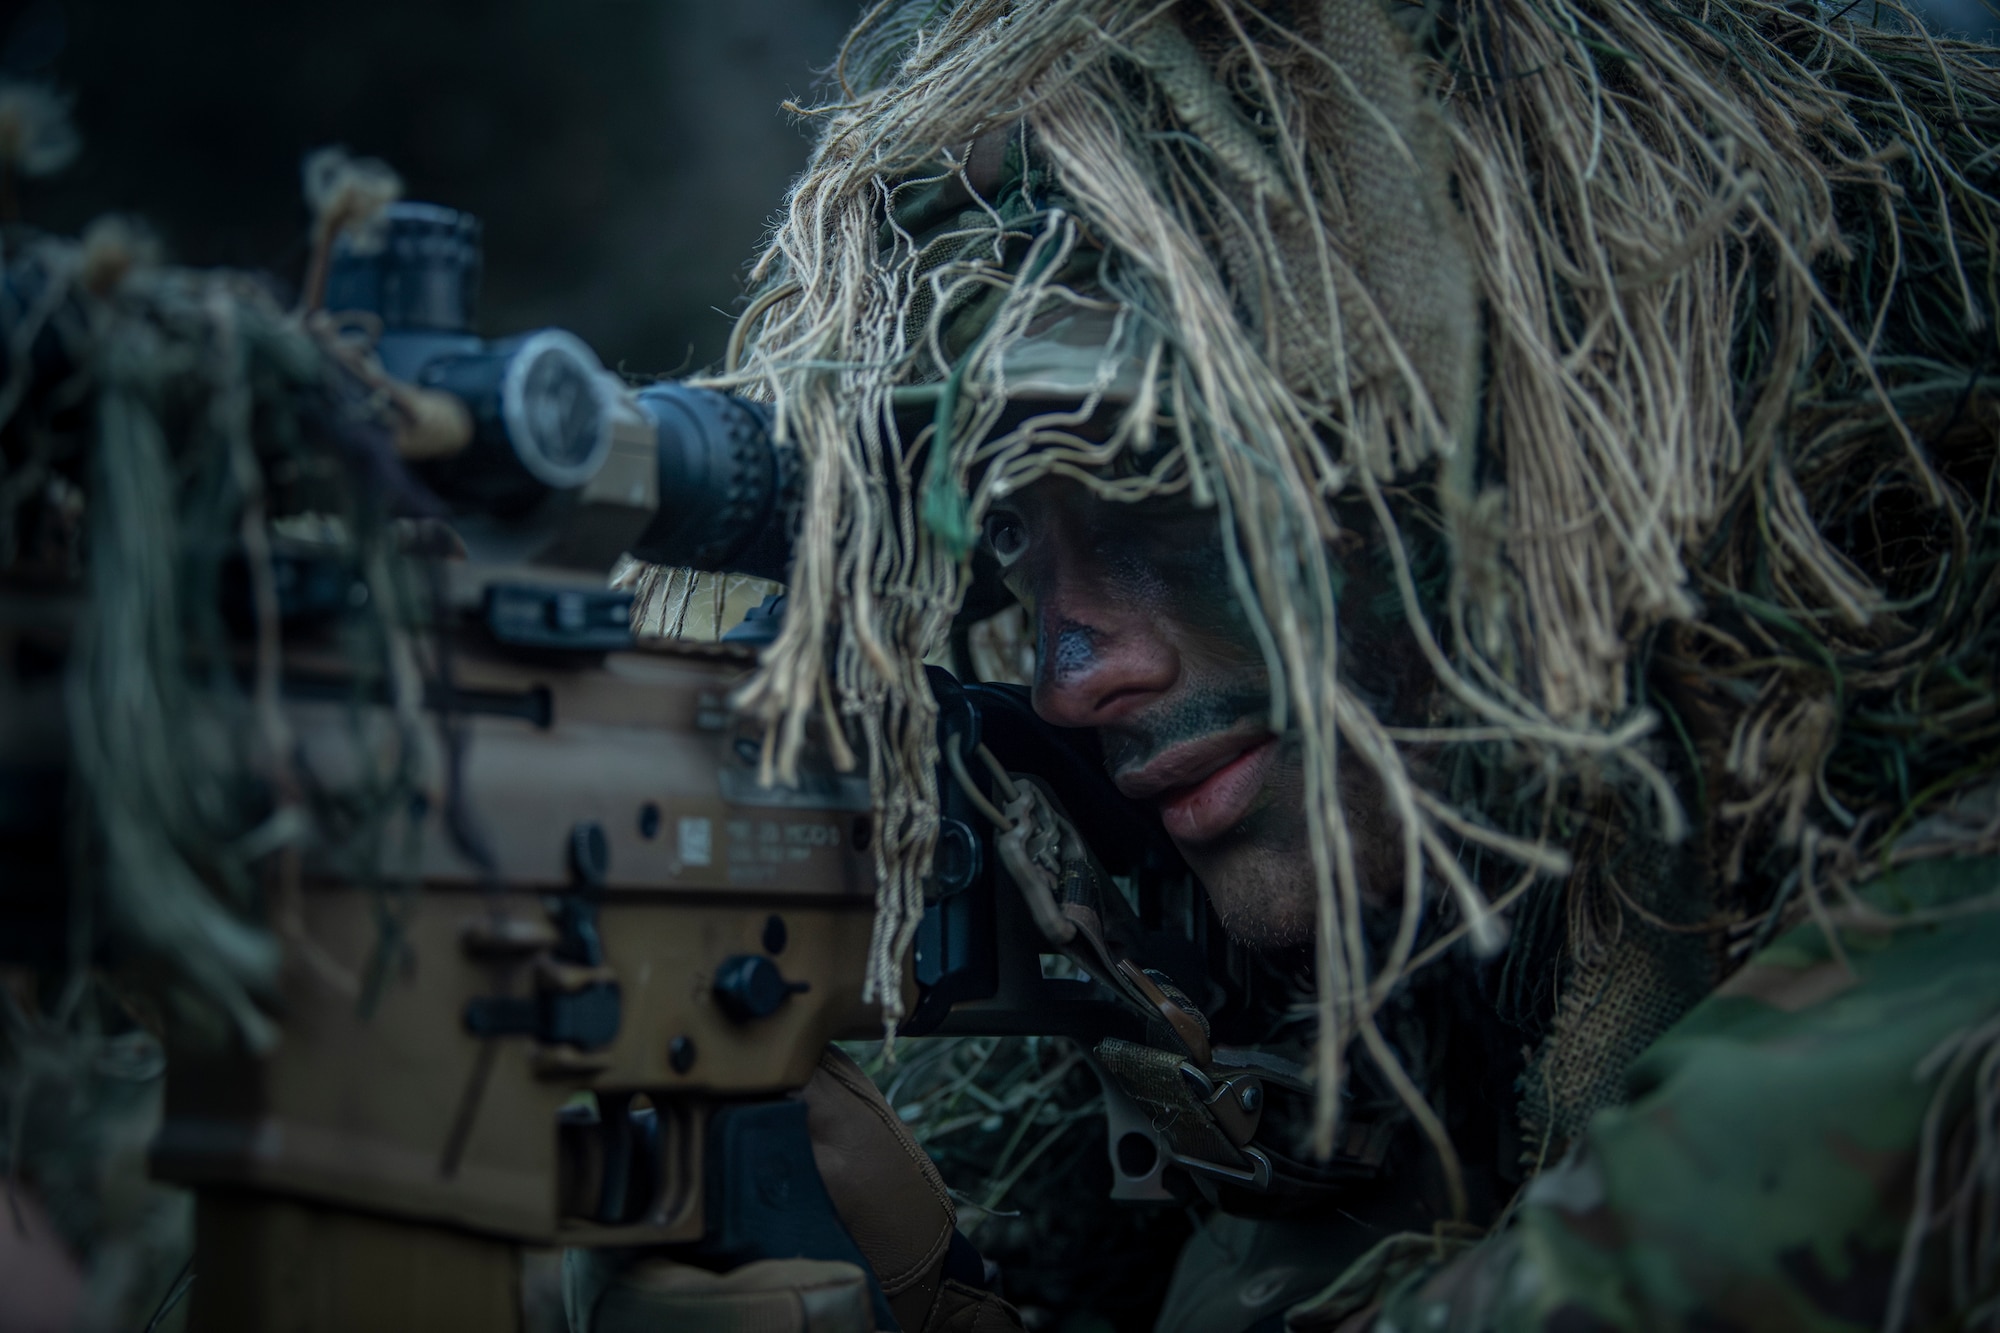 Staff Sgt. Aaron Weaver, a 14th Air Support Operations Squadron tactical air control party craftsman, aims down his SCAR MK 20 sniper support rifle scope